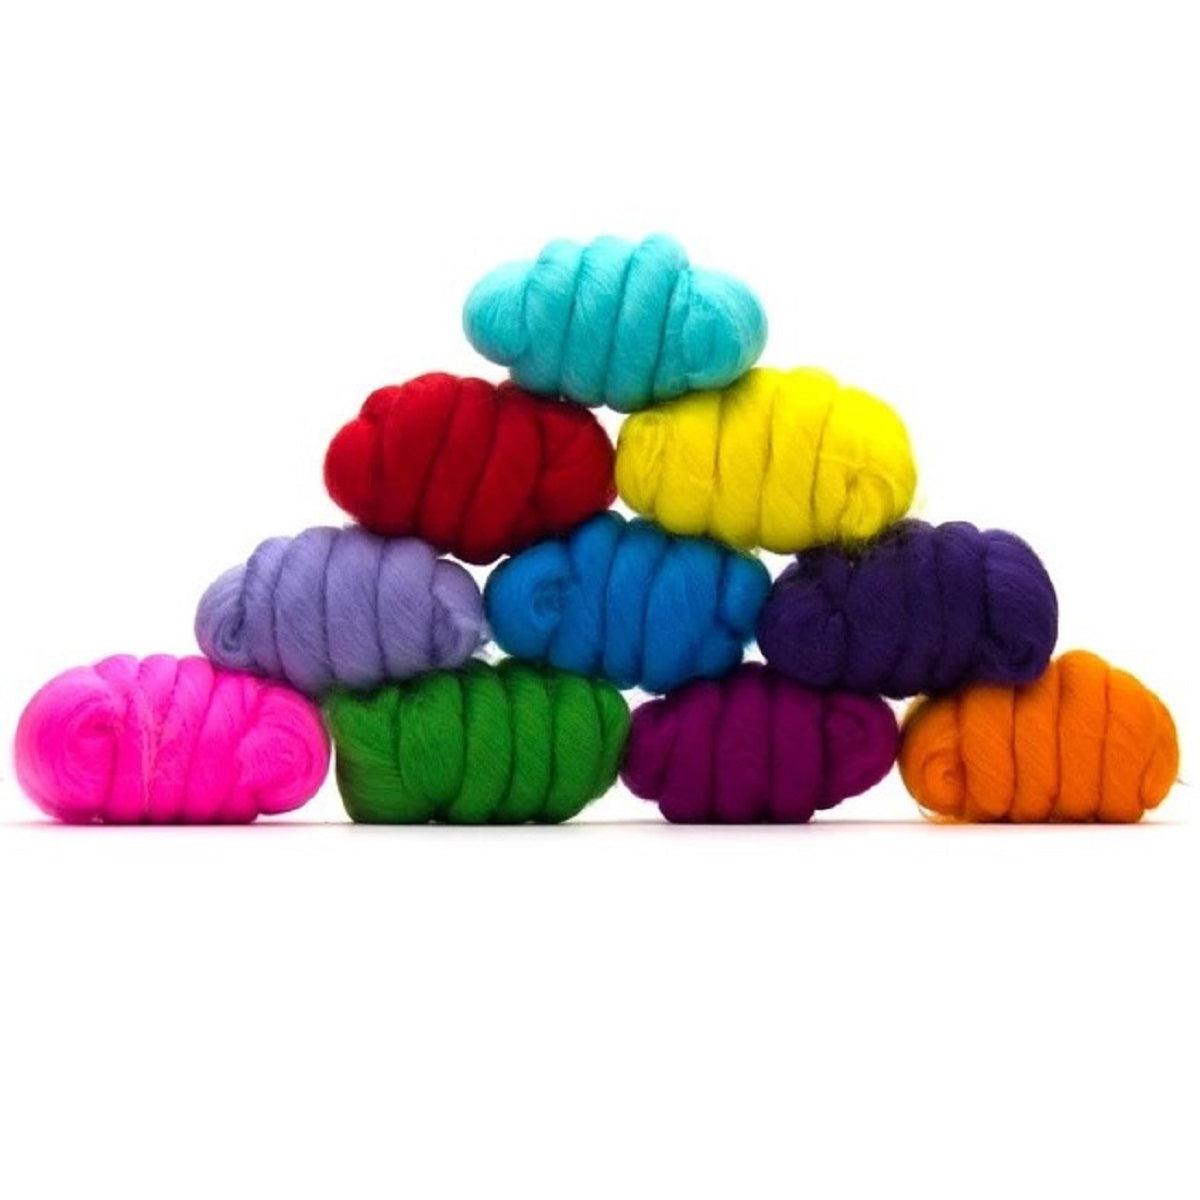 Mixed Merino Wool Variety Pack | Beautiful Brights (Multicolored) 250 Grams, 23 Micron - Textile Indie 